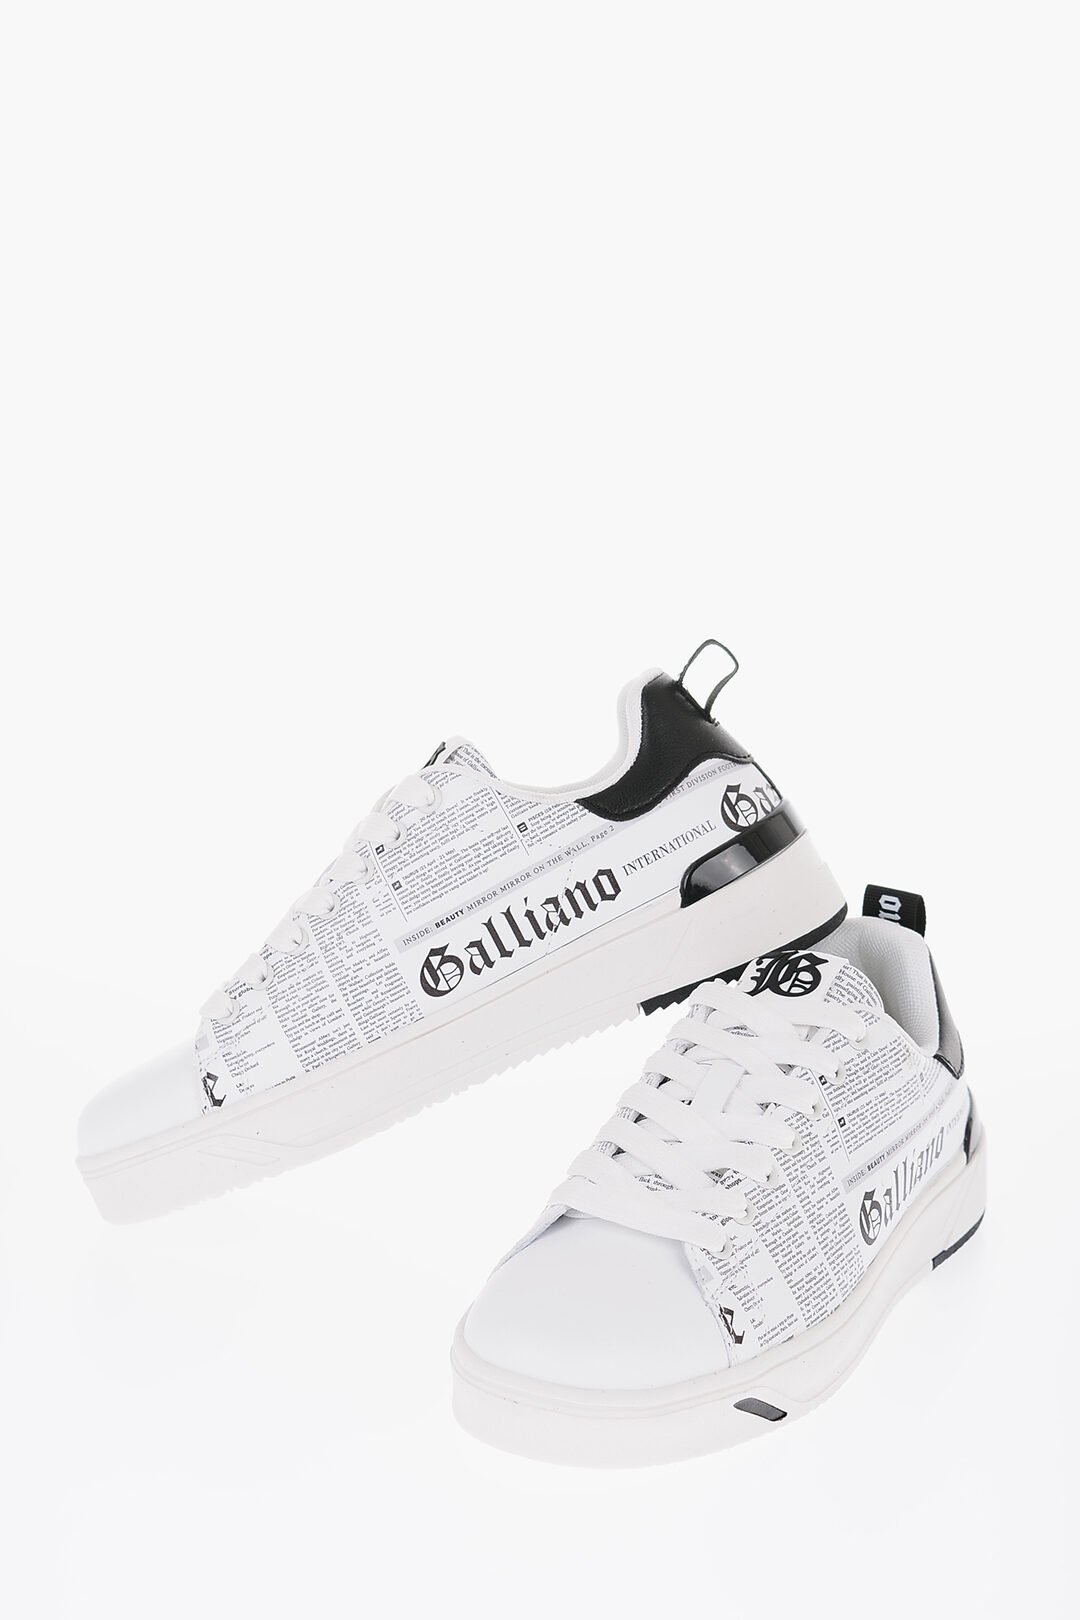 Galliano Faux Leather Low-Top With All-Over Lettering Print men - Glamood Outlet